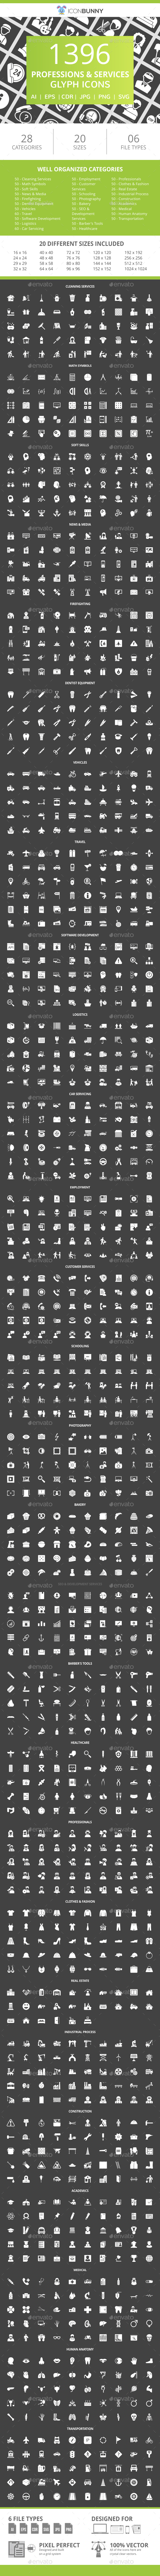 1396 Professions & Services Glyph Inverted Icons